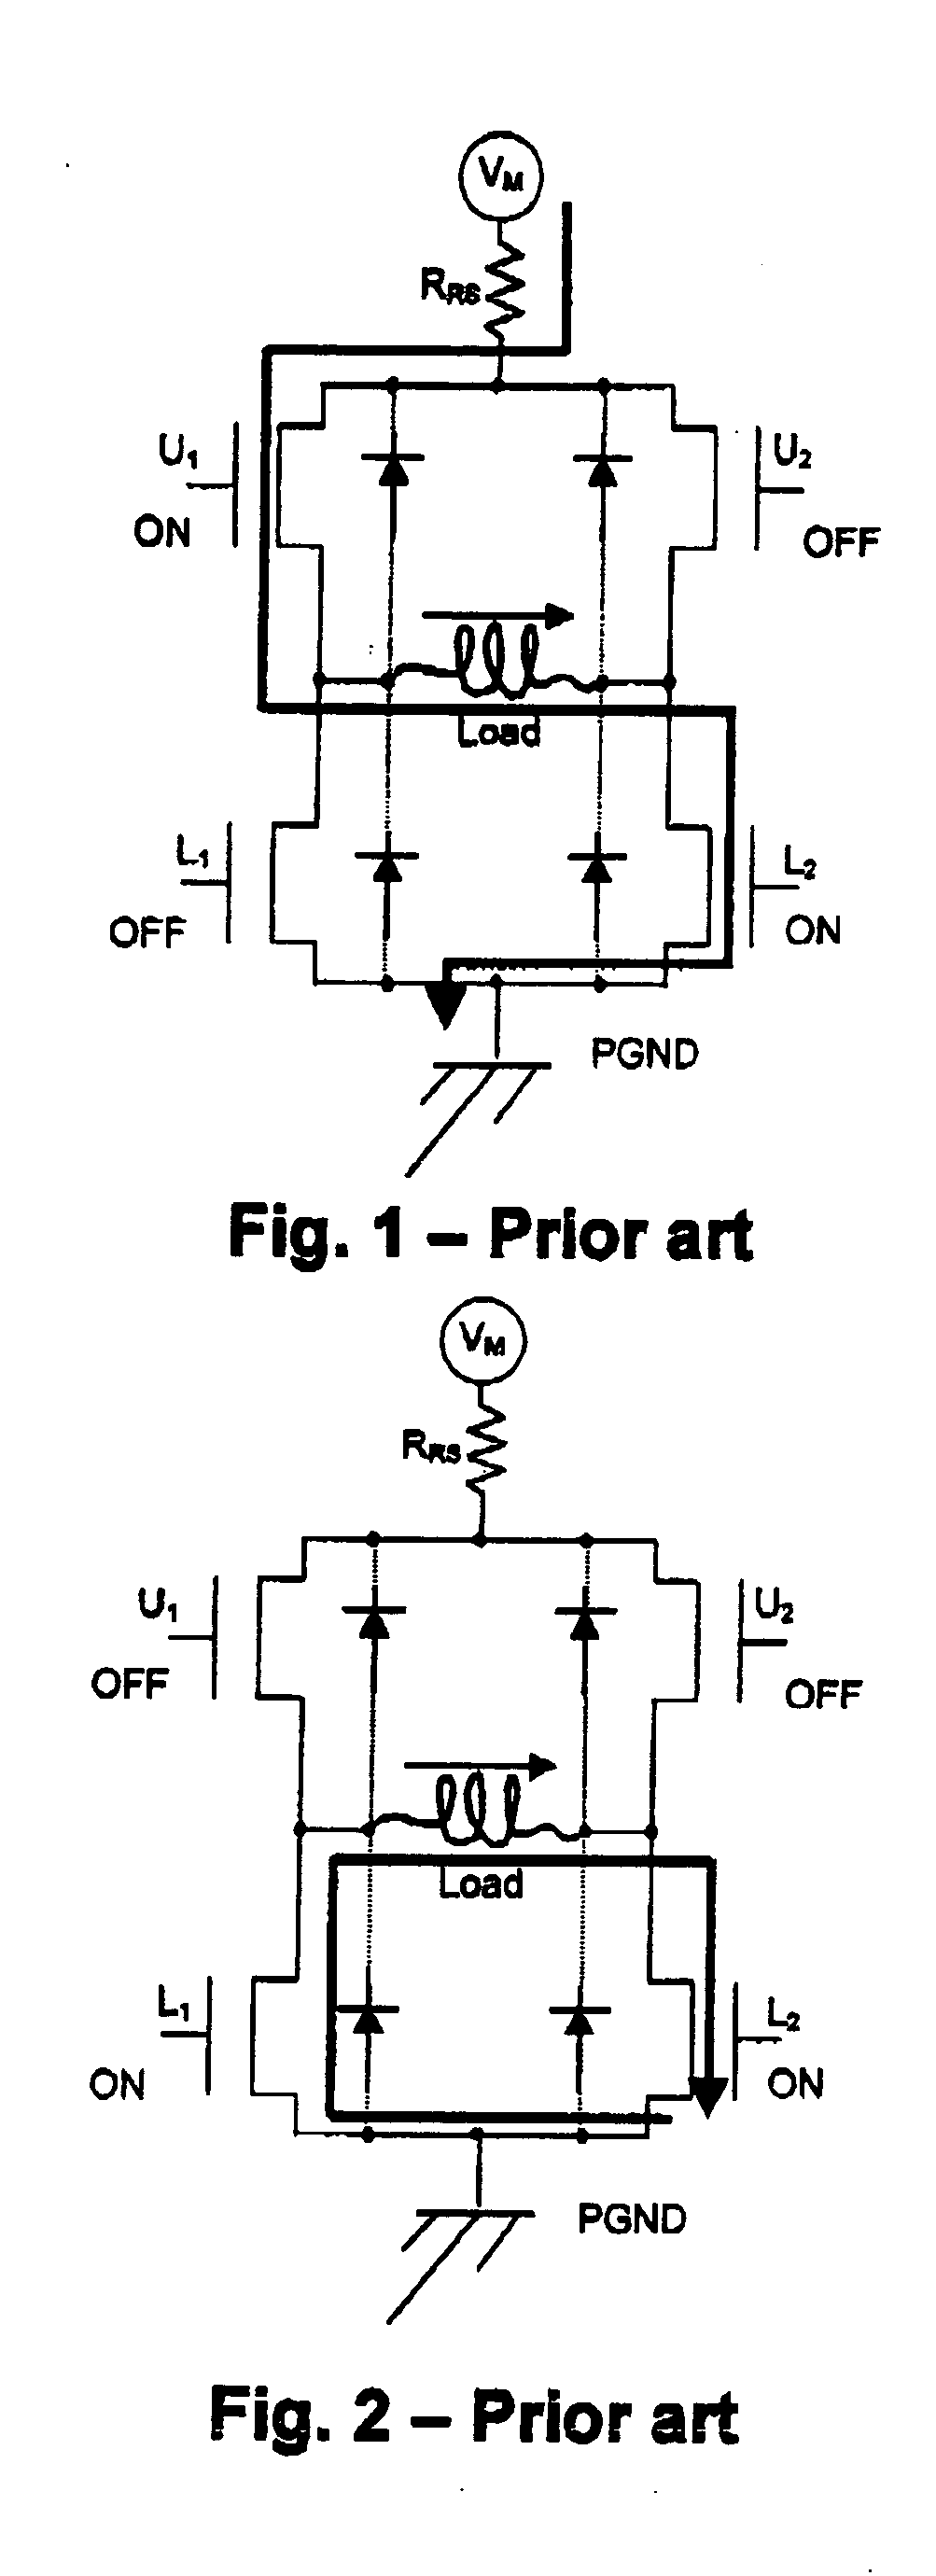 Control of current in an inductance with pulse width modulation at control frequency